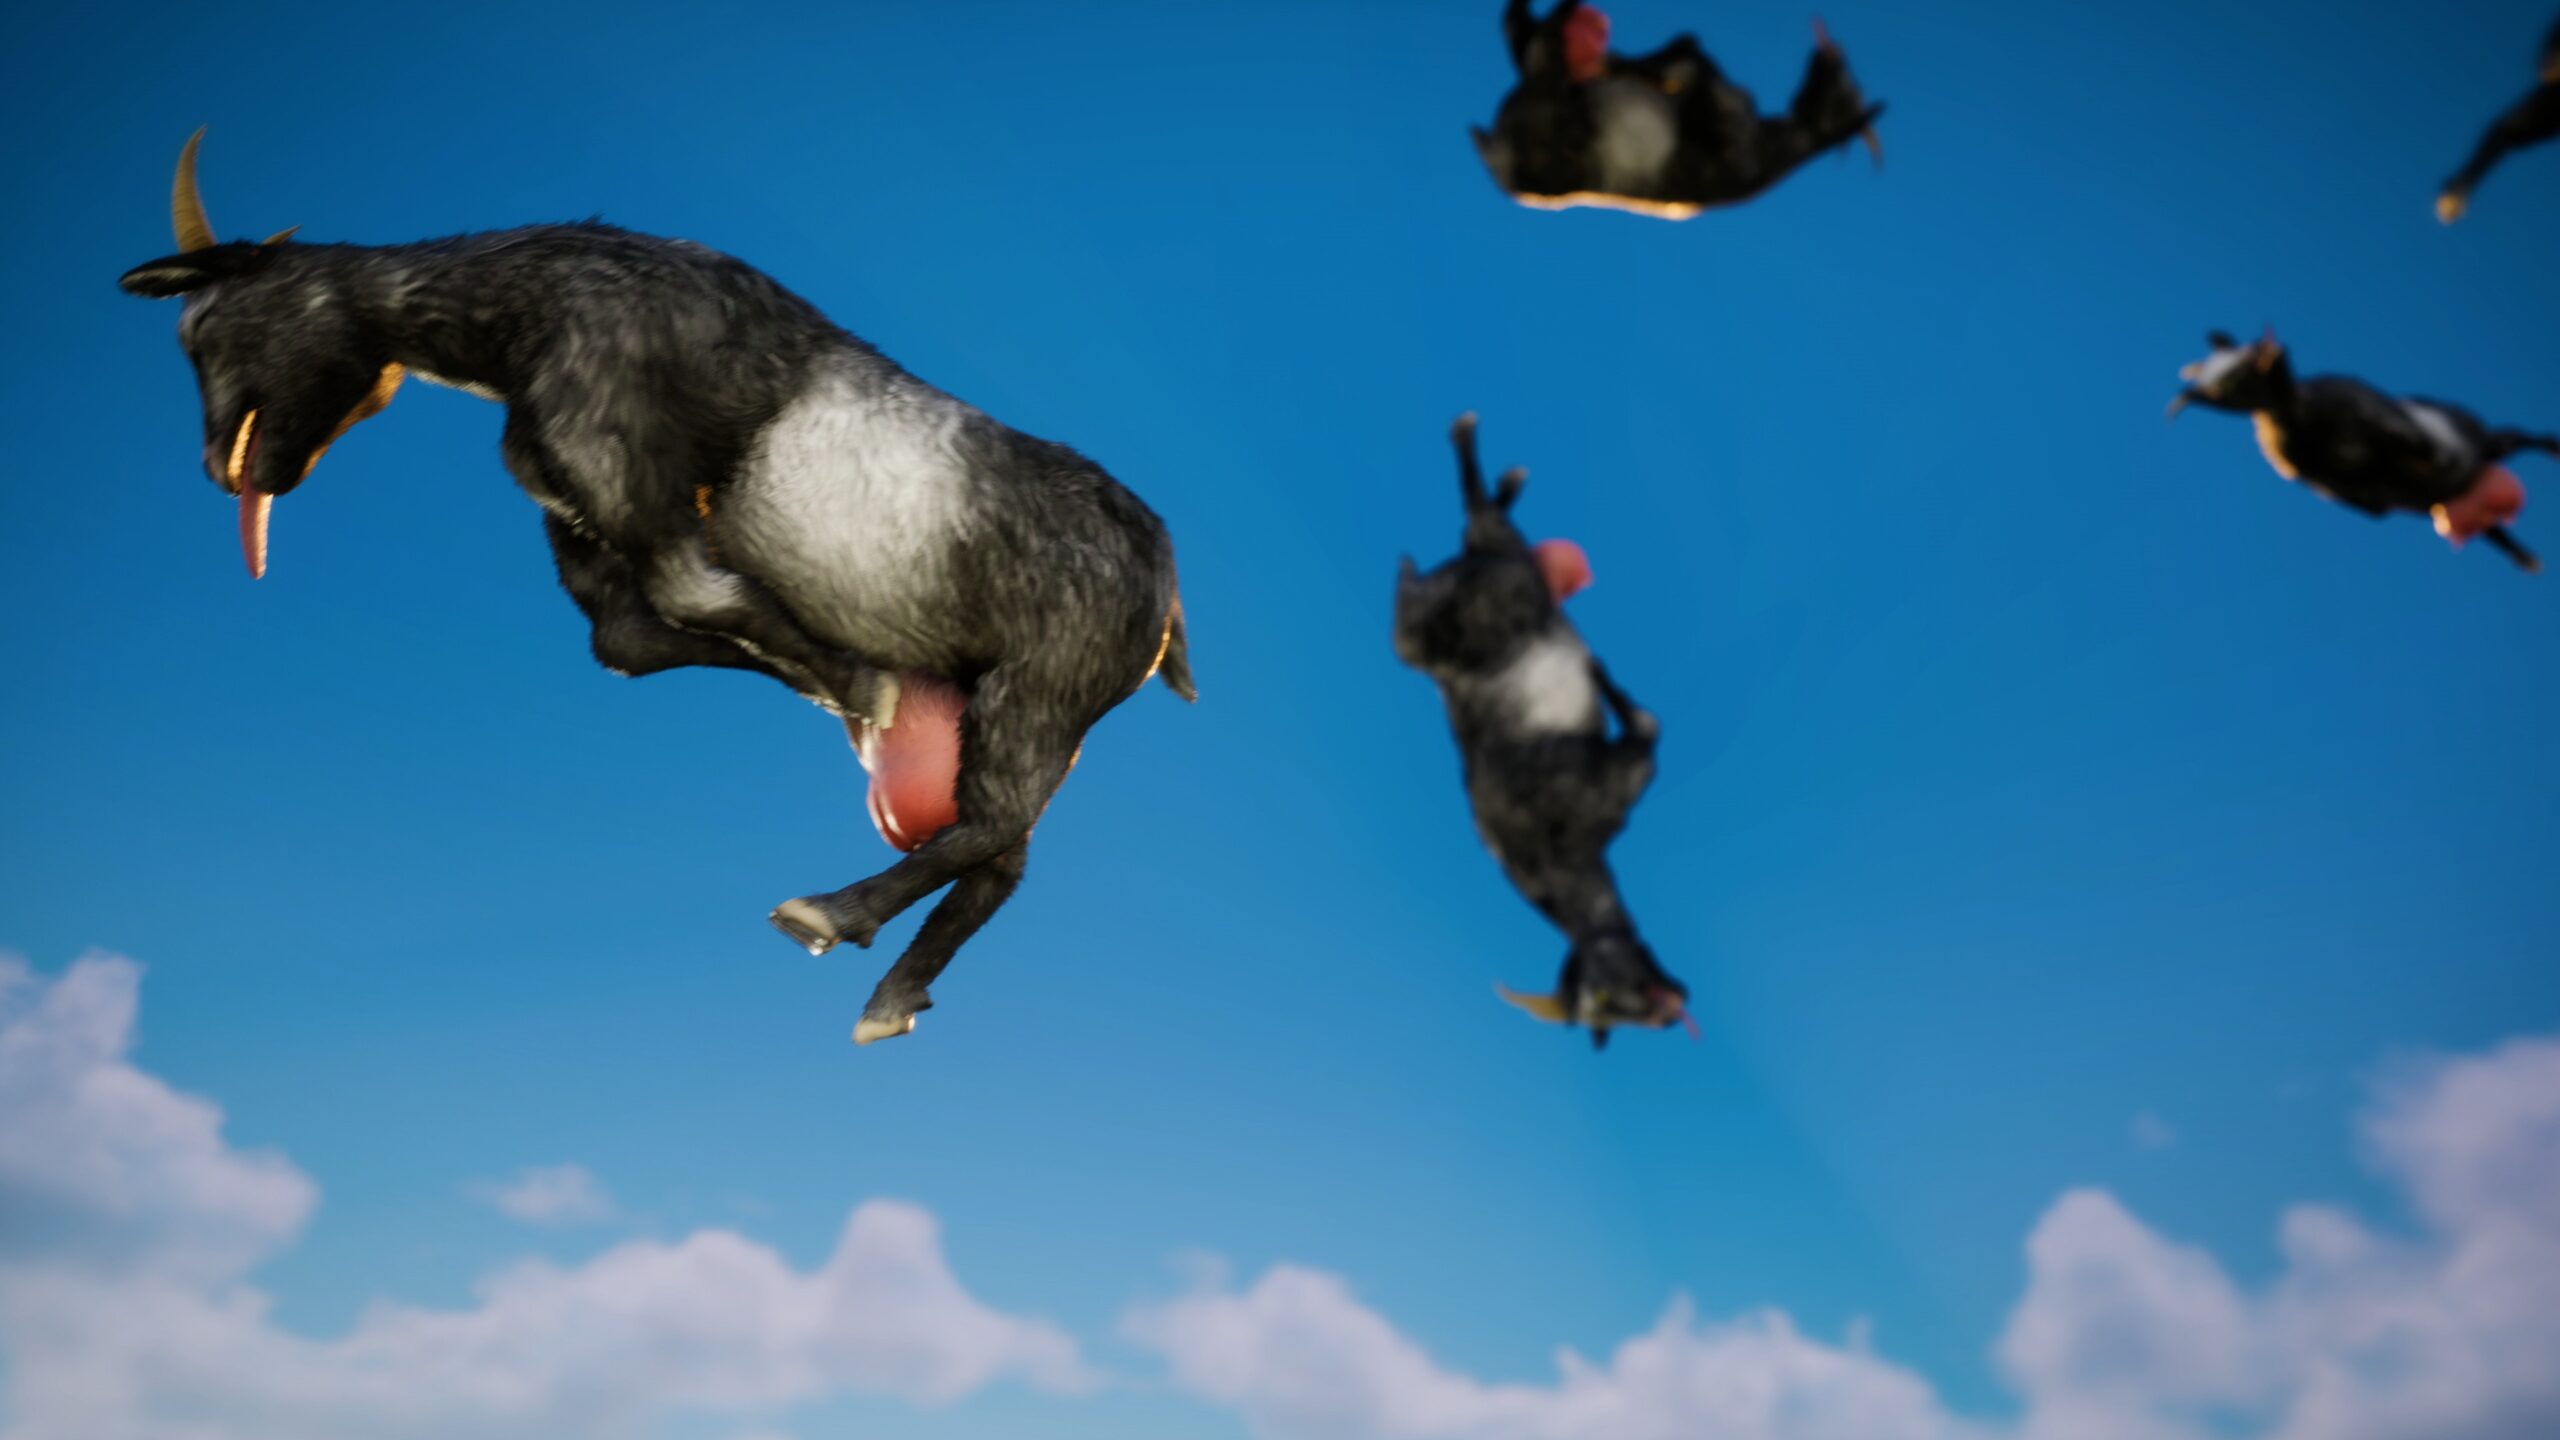 Goat Simulator 3 gets release date and special edition